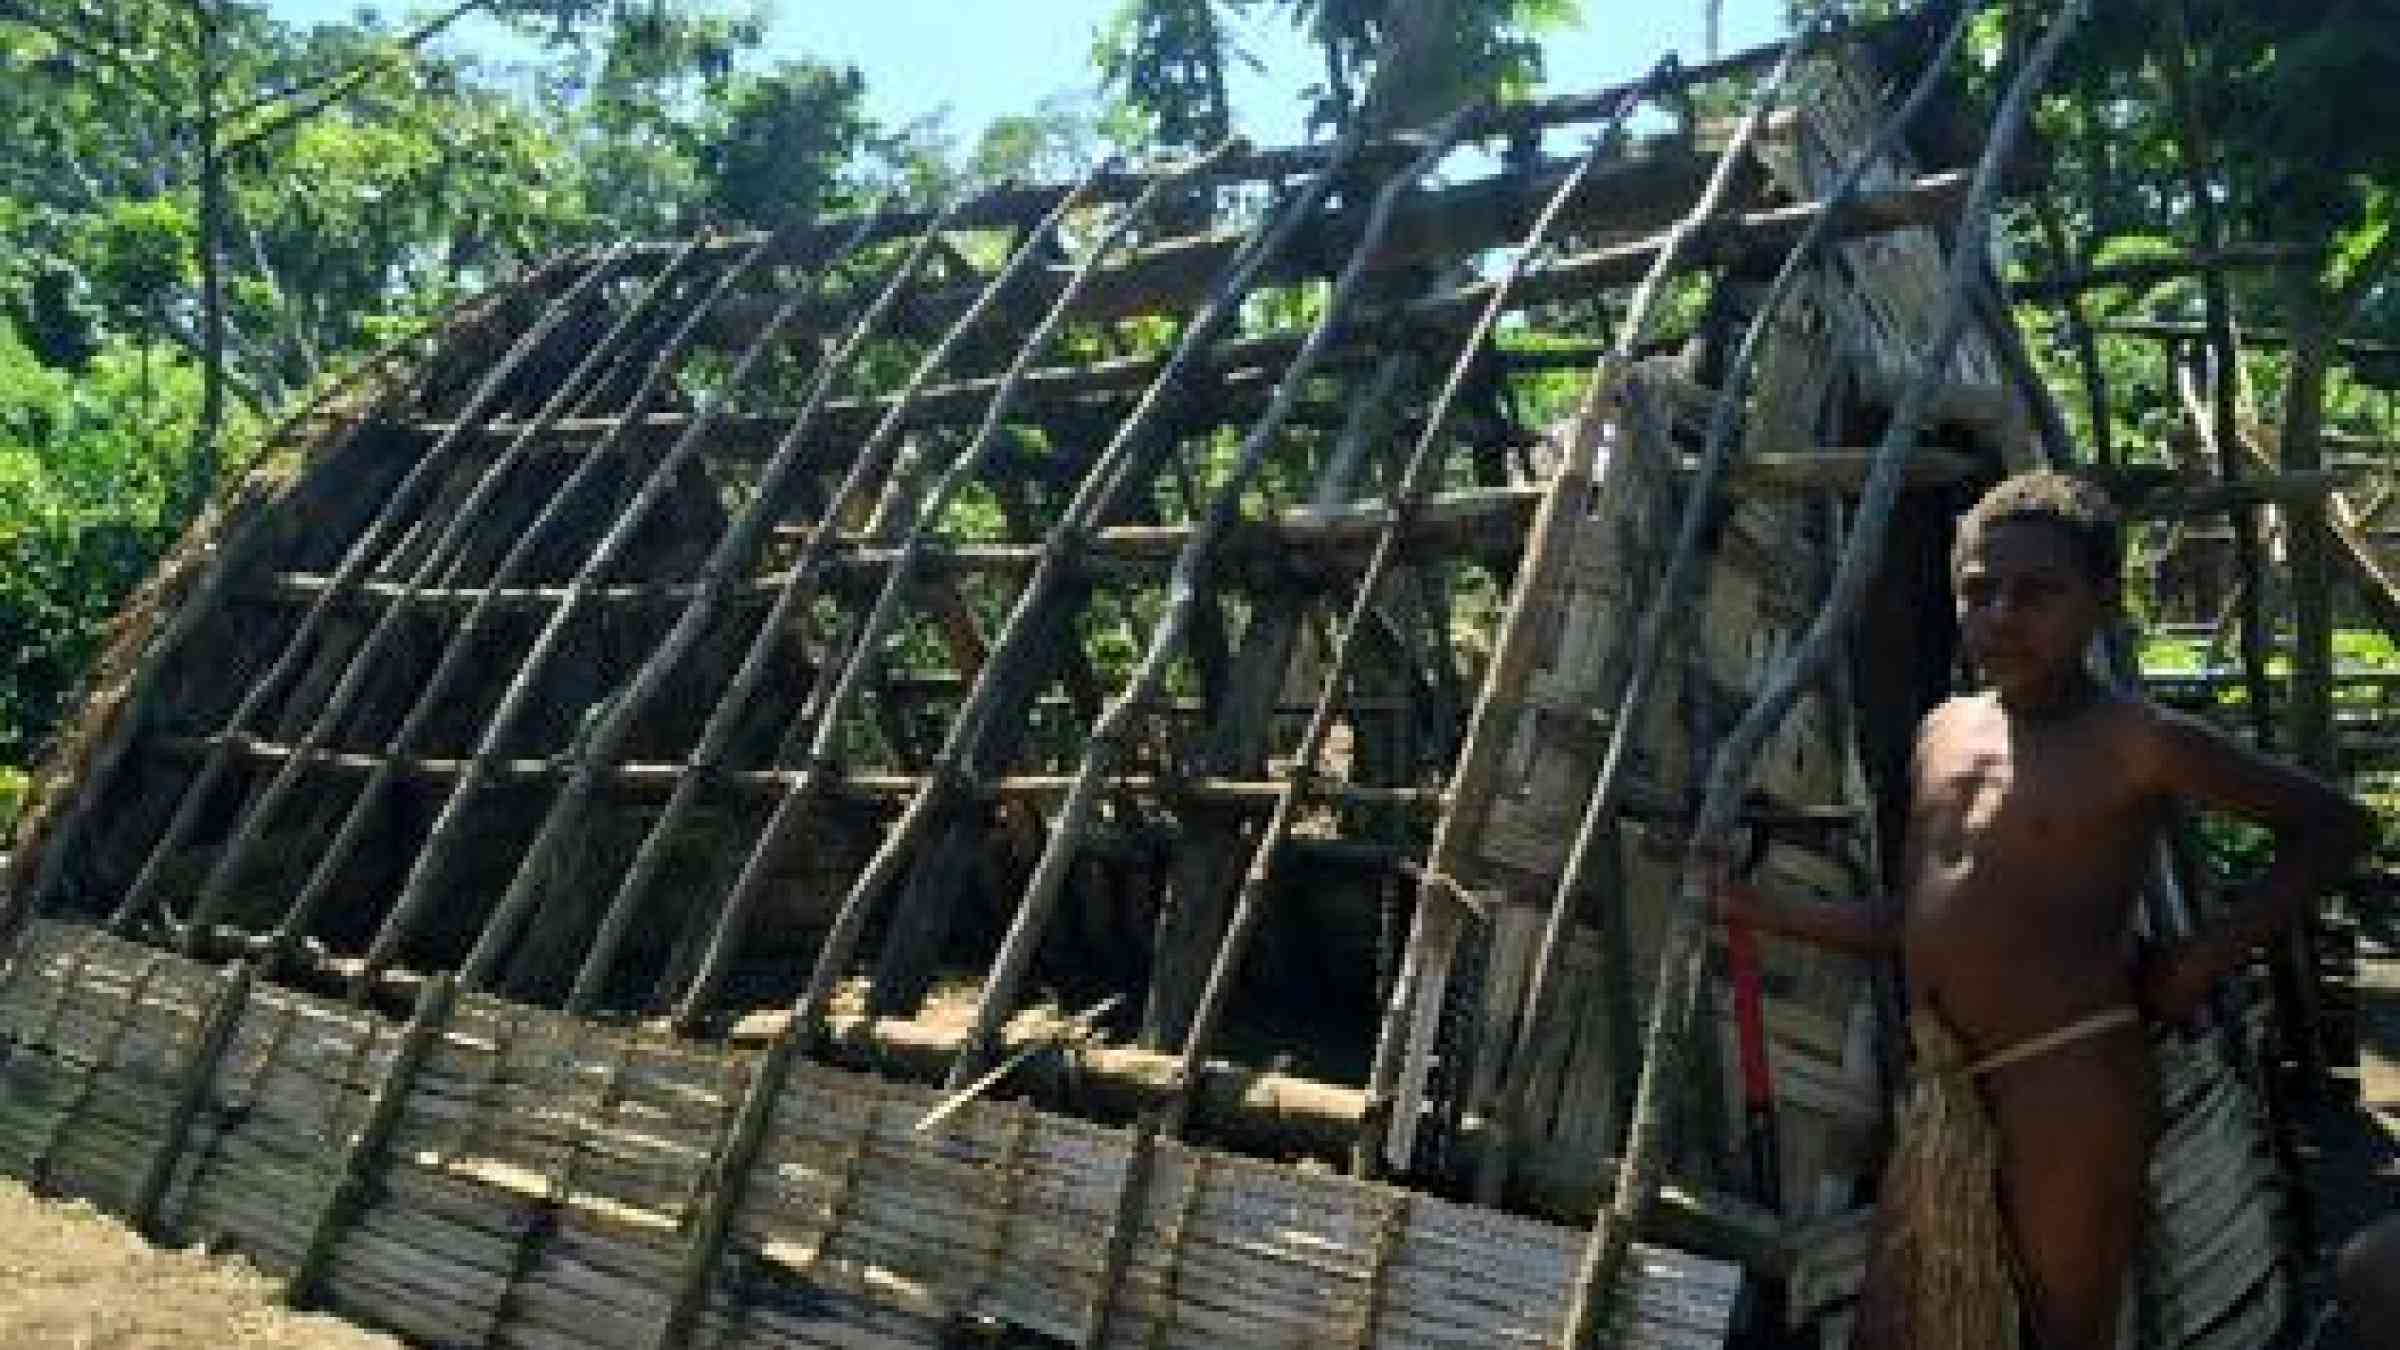 A traditional cyclone shelter under construction on Vanuatu which suffered severe economic losses following Cyclone Pam in March, 2015. (Photo: UNISDR)